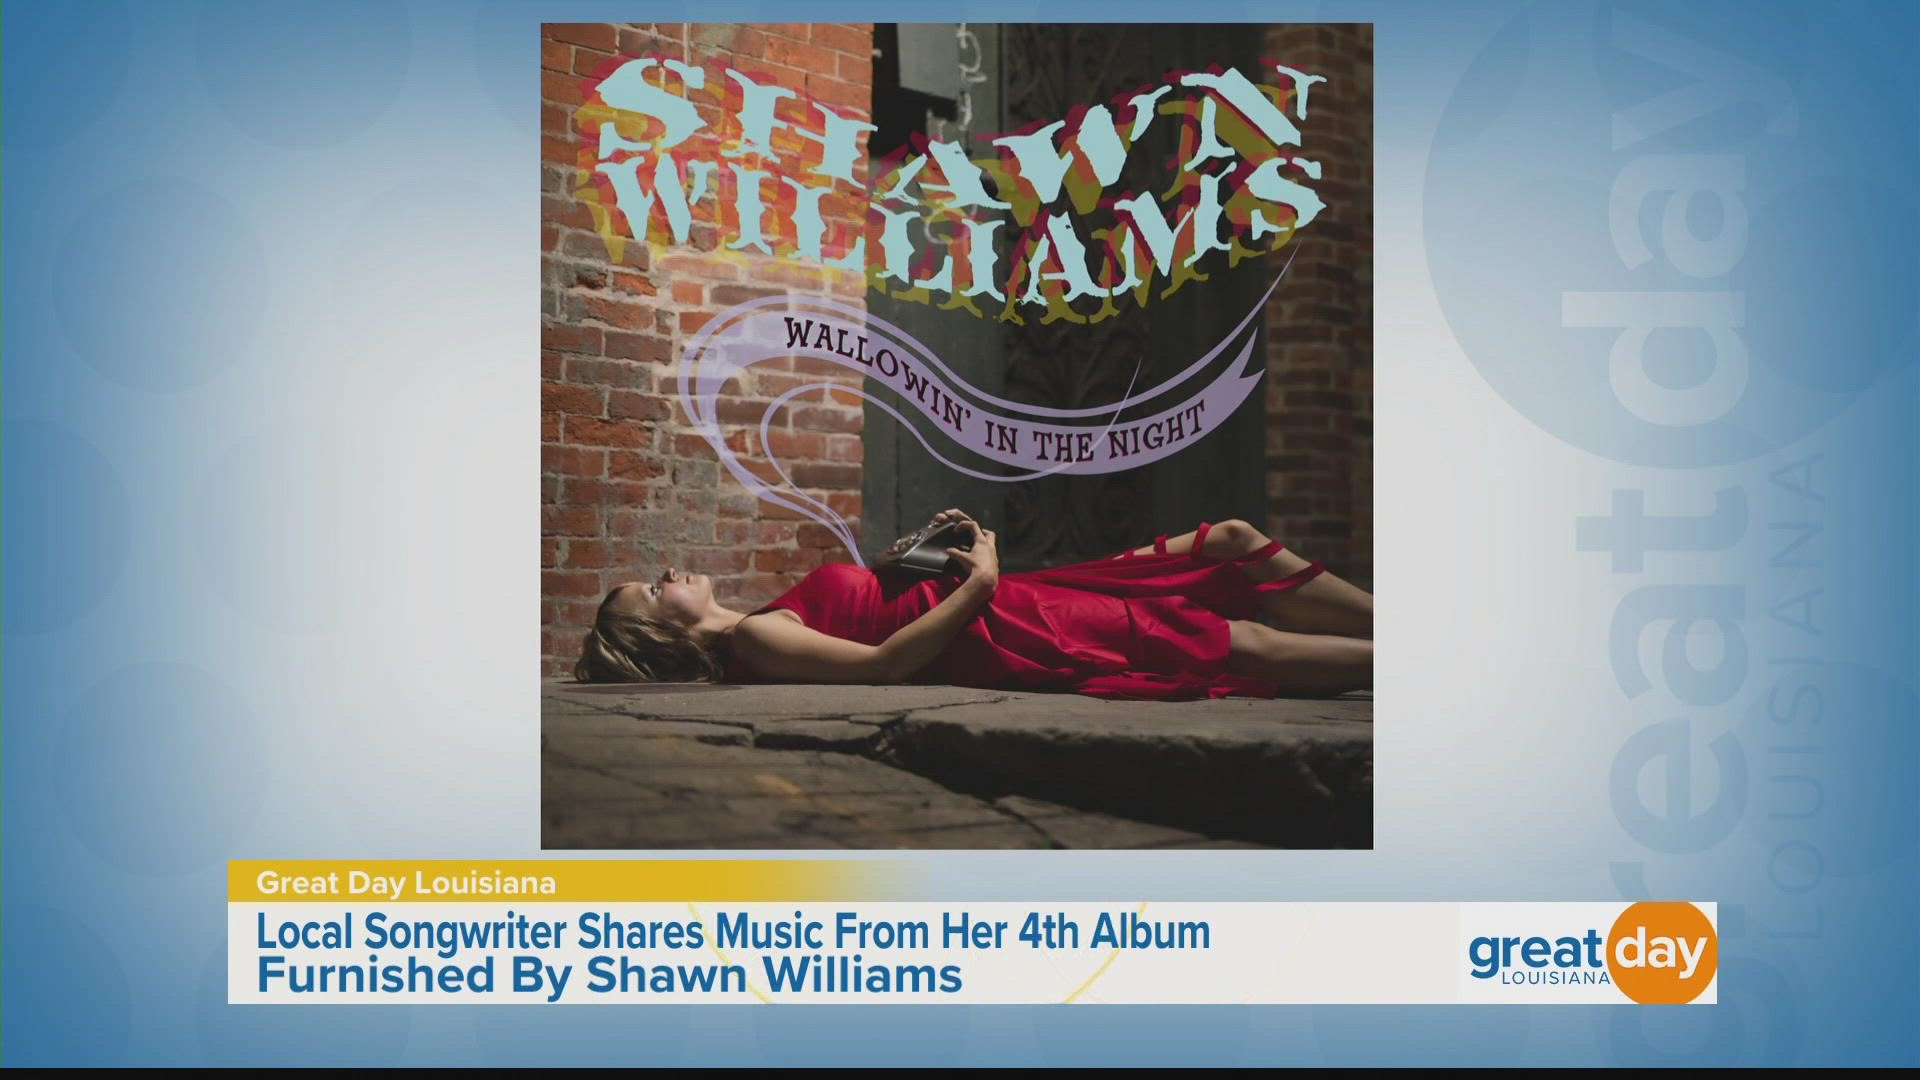 Local musician Shawn Williams shares music from her latest album, "Wallowin' In The Night."